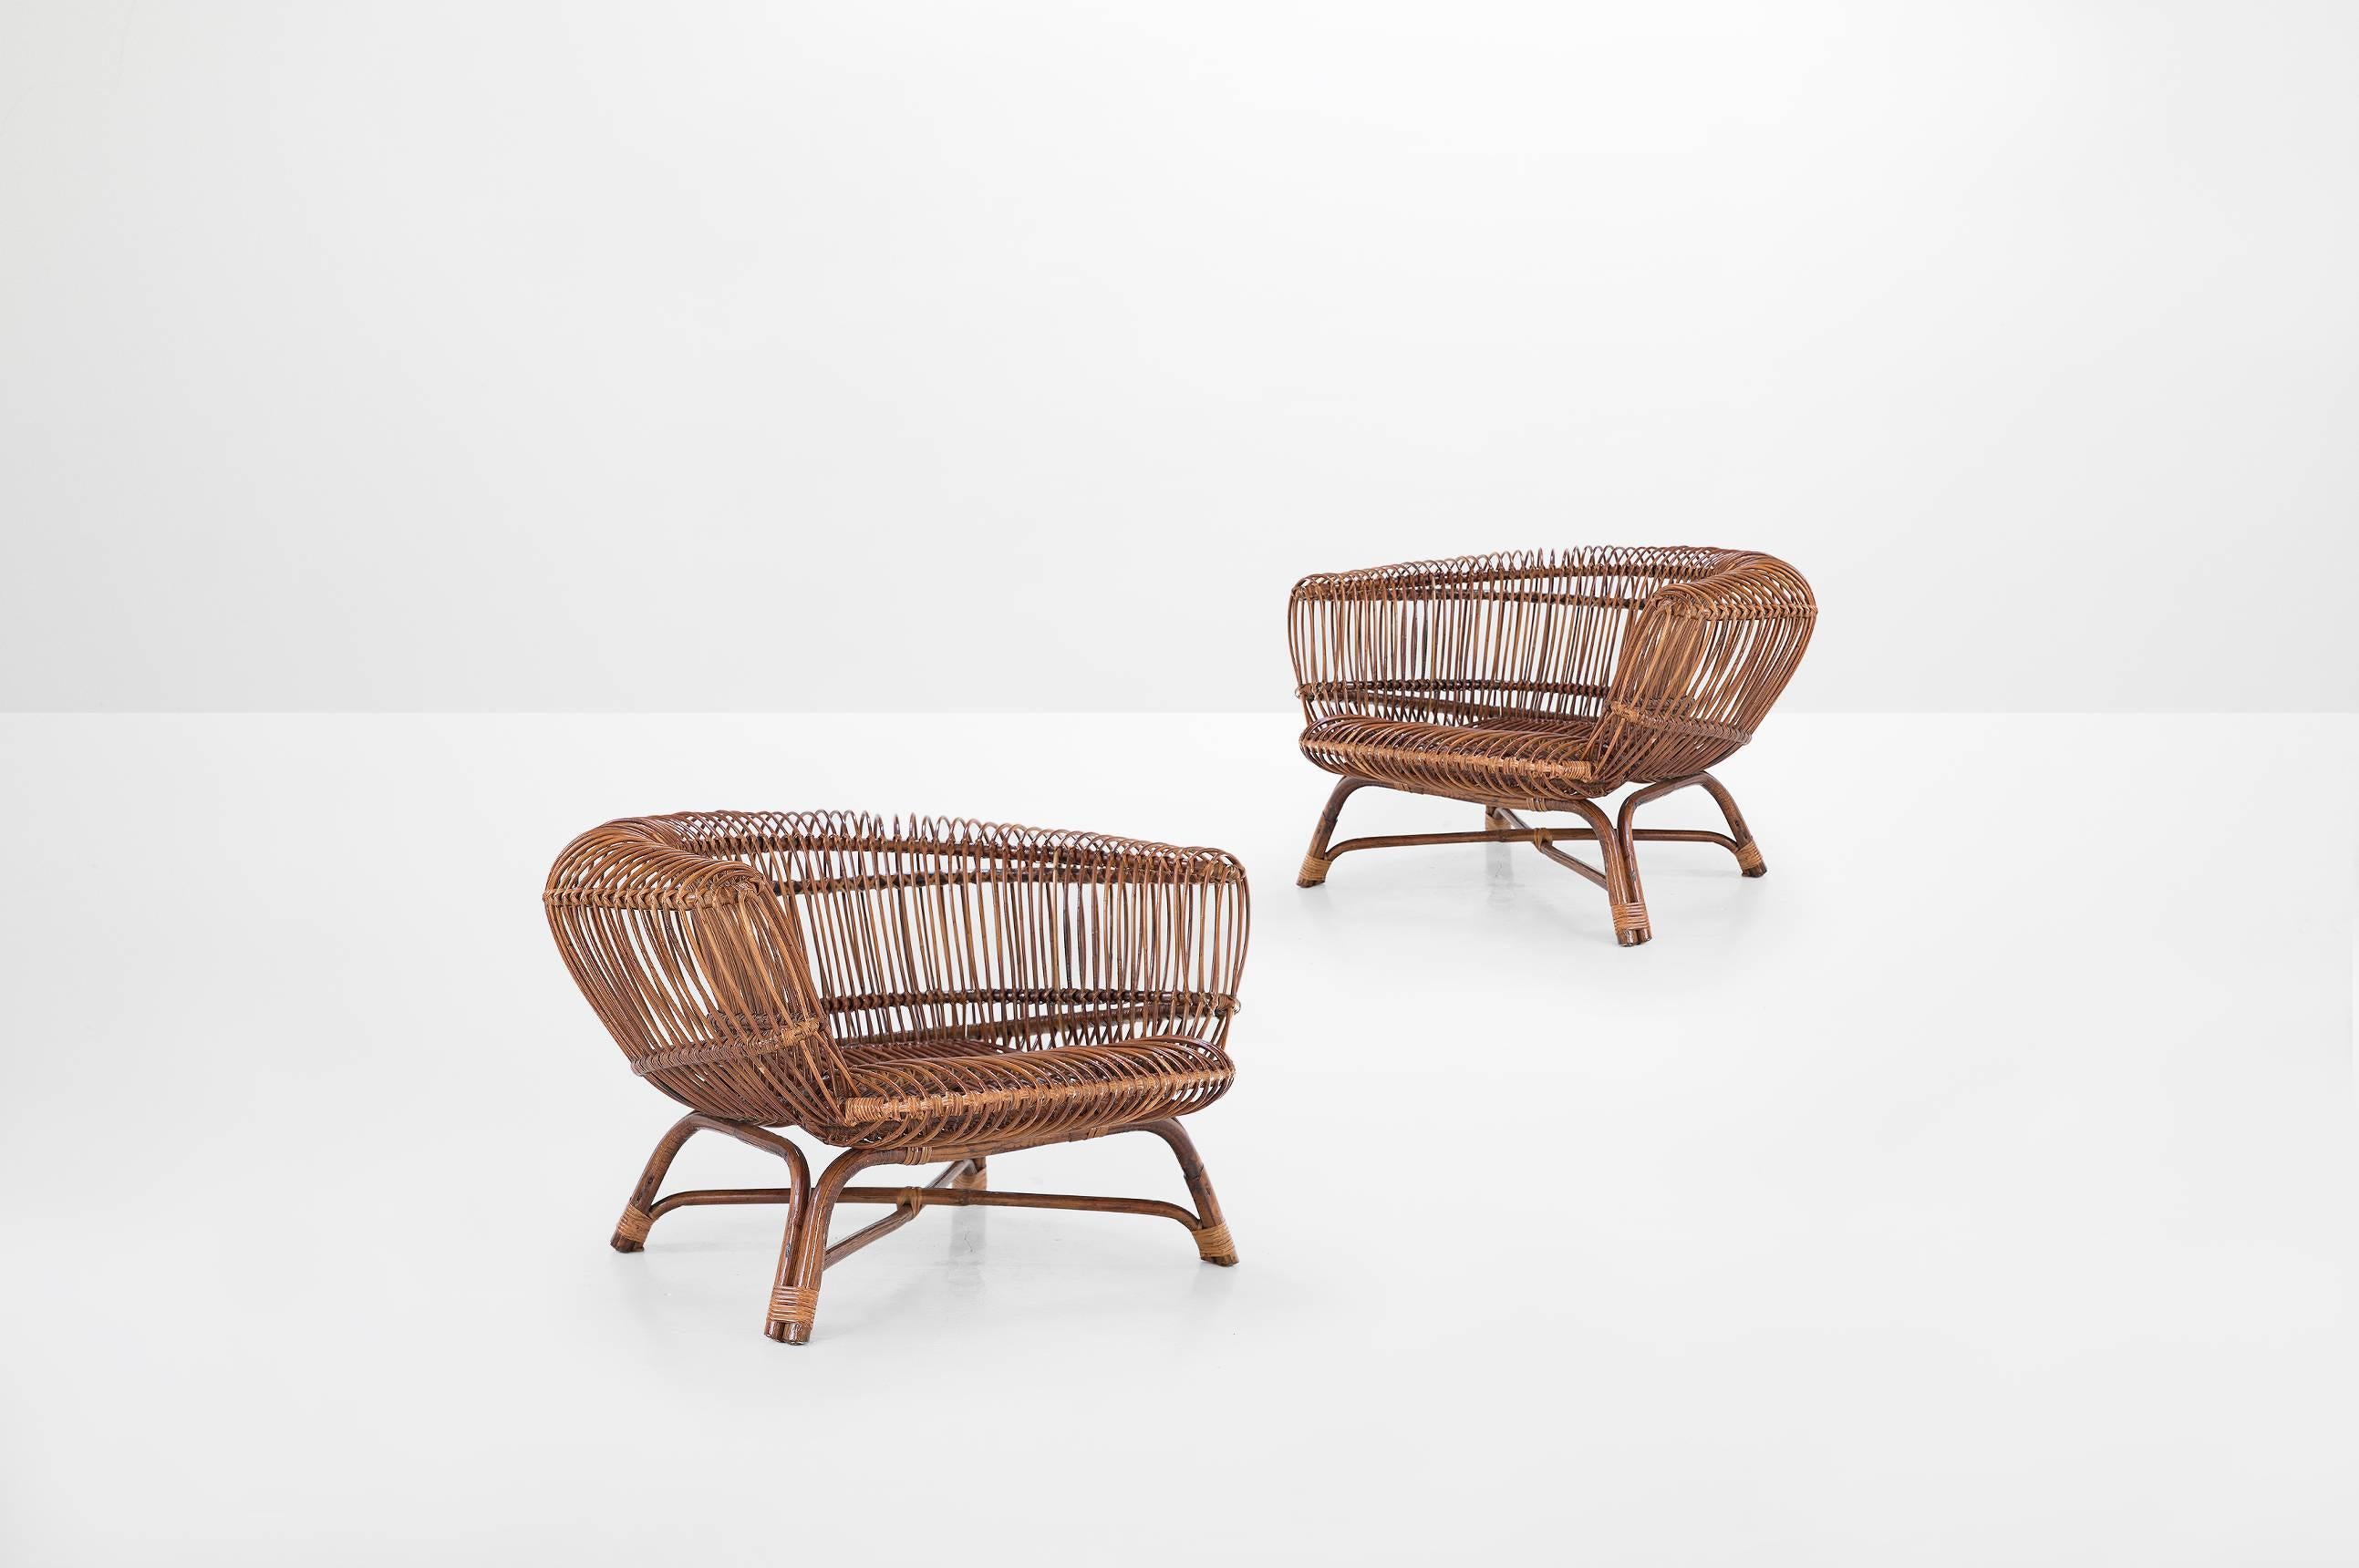 Paolo Tilche (1925-2000)

Pair of armchairs model “Silvia”
Manufactured by Arform, 
Italy, 1956
Rattan
Pair of Italian 20th century ratan armchairs Model “Silvia”

Measurements
100 cm x 100 cm x 63 cm
39.37 in x 39.37 in x 24.8